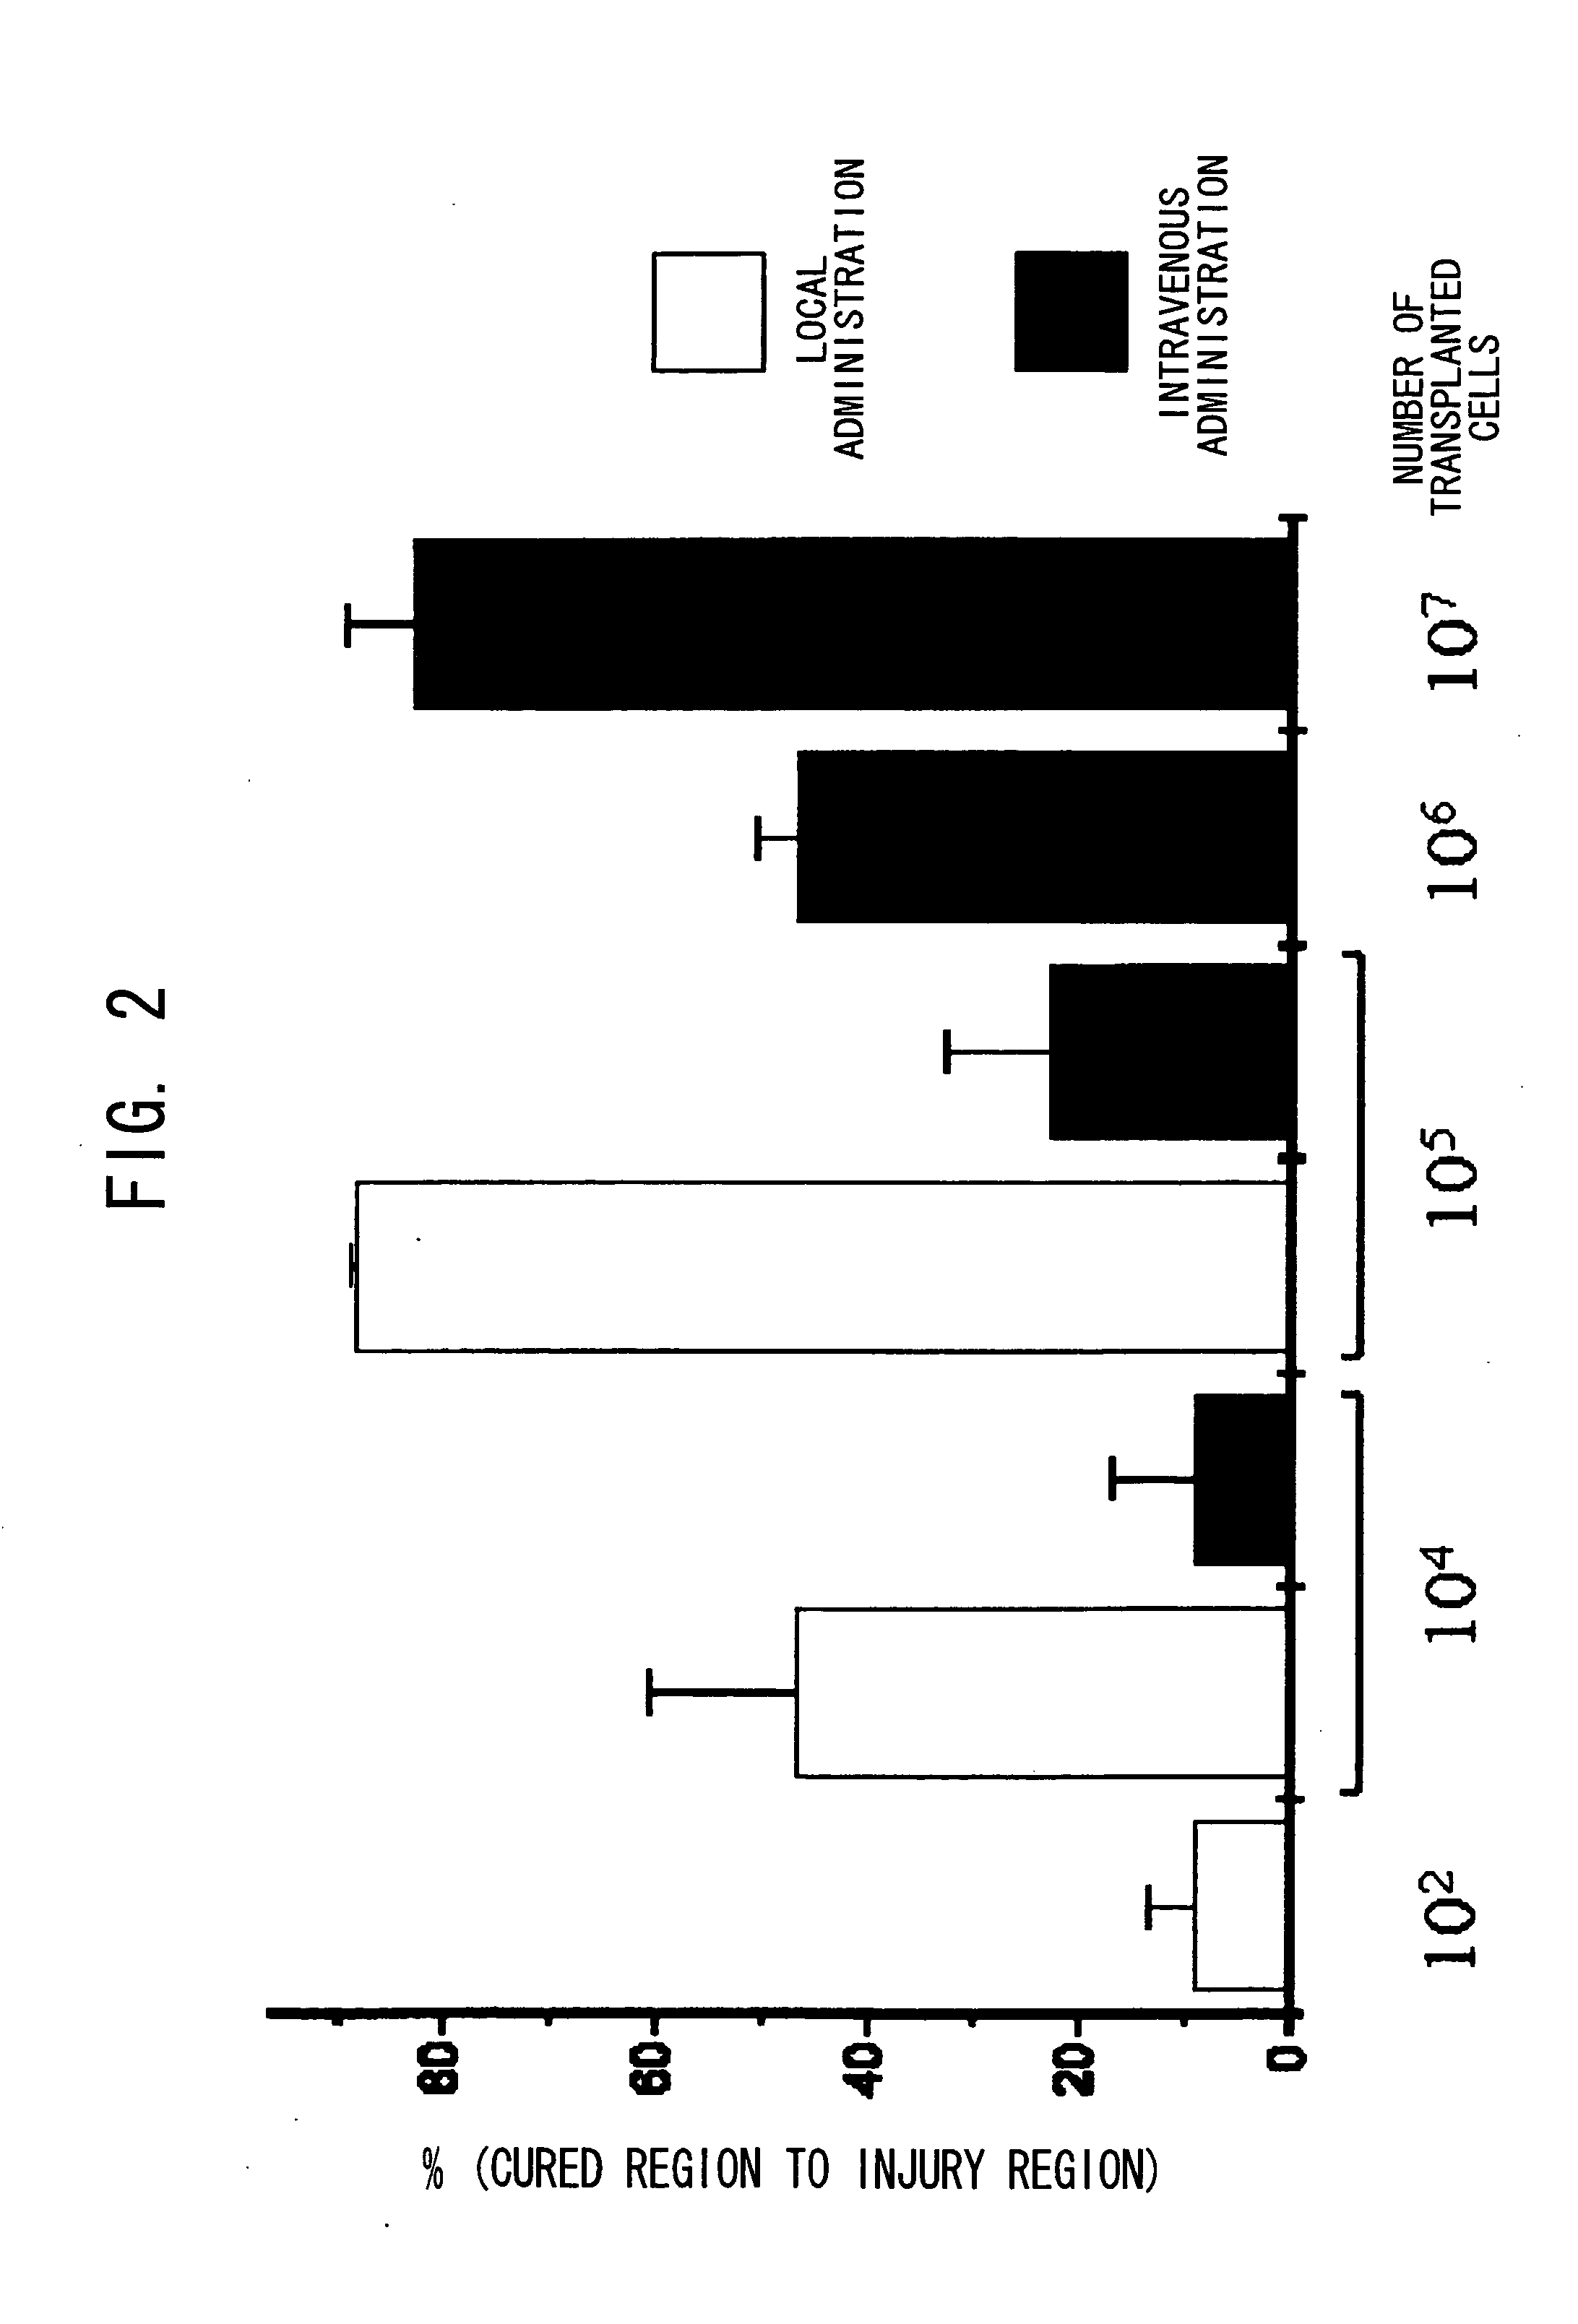 Internally administered therapeutic agents for diseases in central and peripheral nervous system comprising mesenchymal cells as an active ingredient